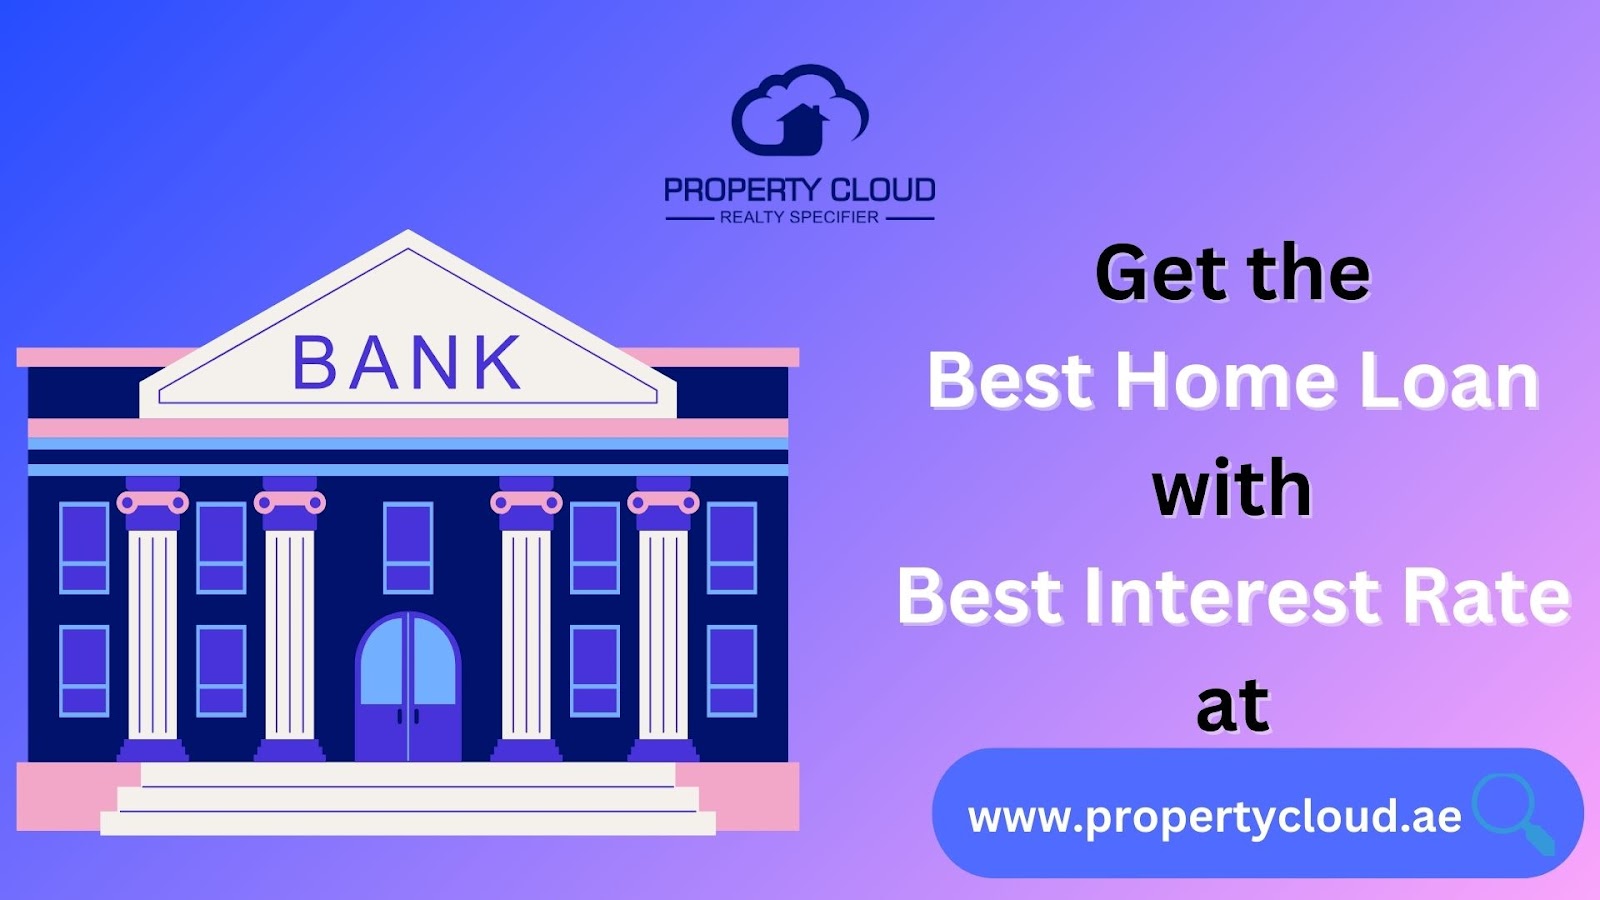 Contact PropertyCloud home loan professionals to get the best home loan at the best rate of interest.